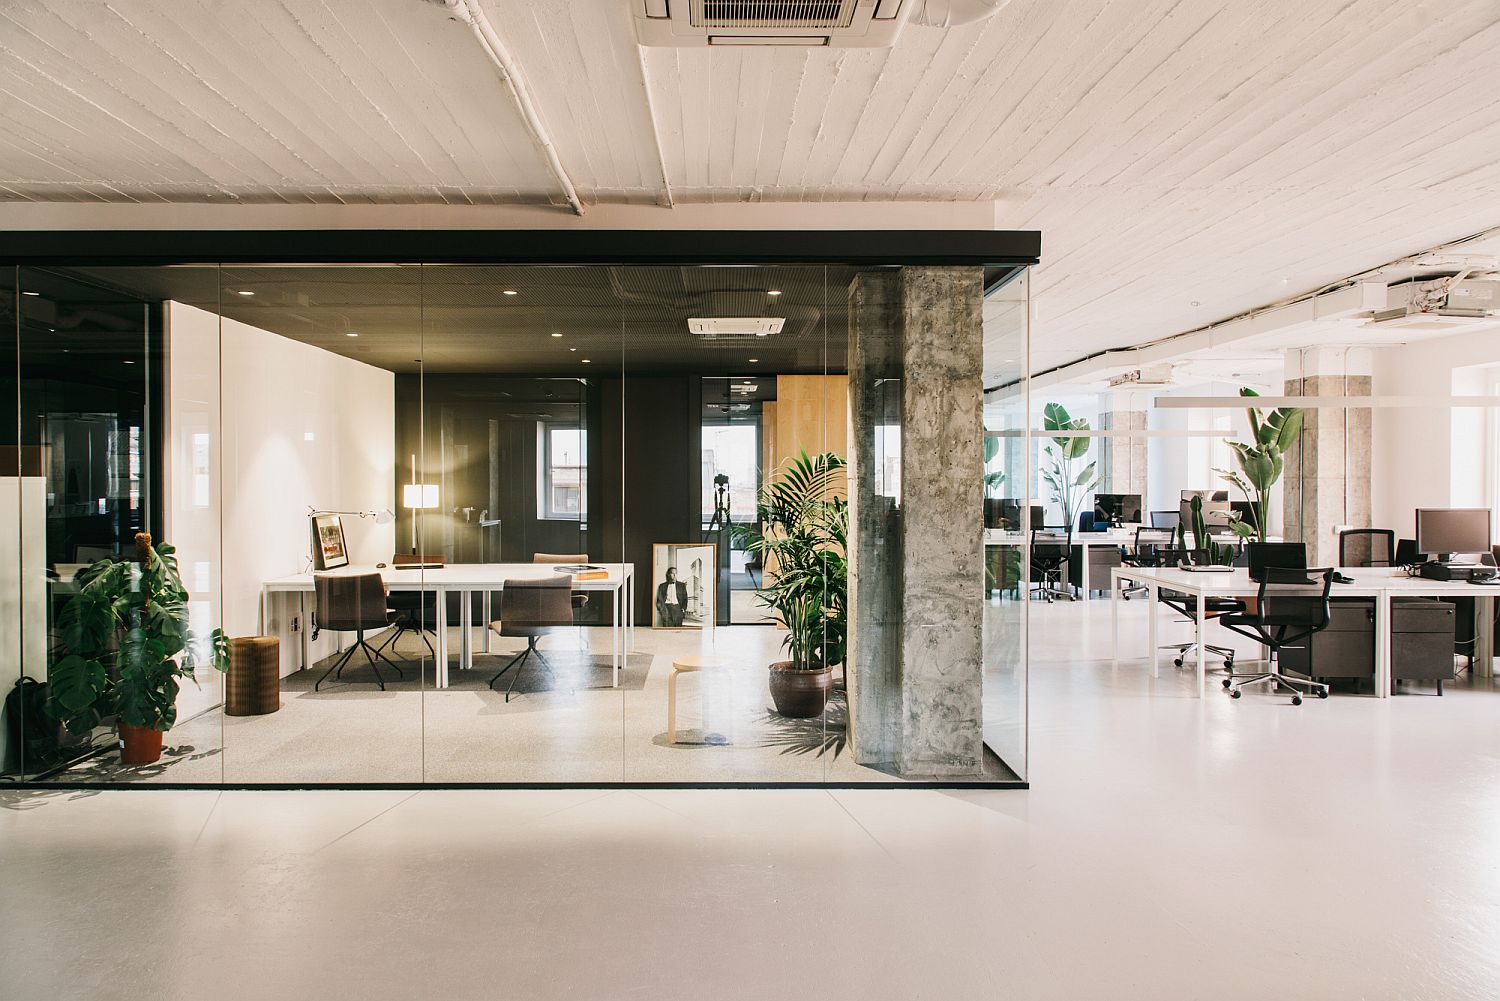 Exposed-concrete-pillars-and-glass-walls-shape-the-private-office-spaces